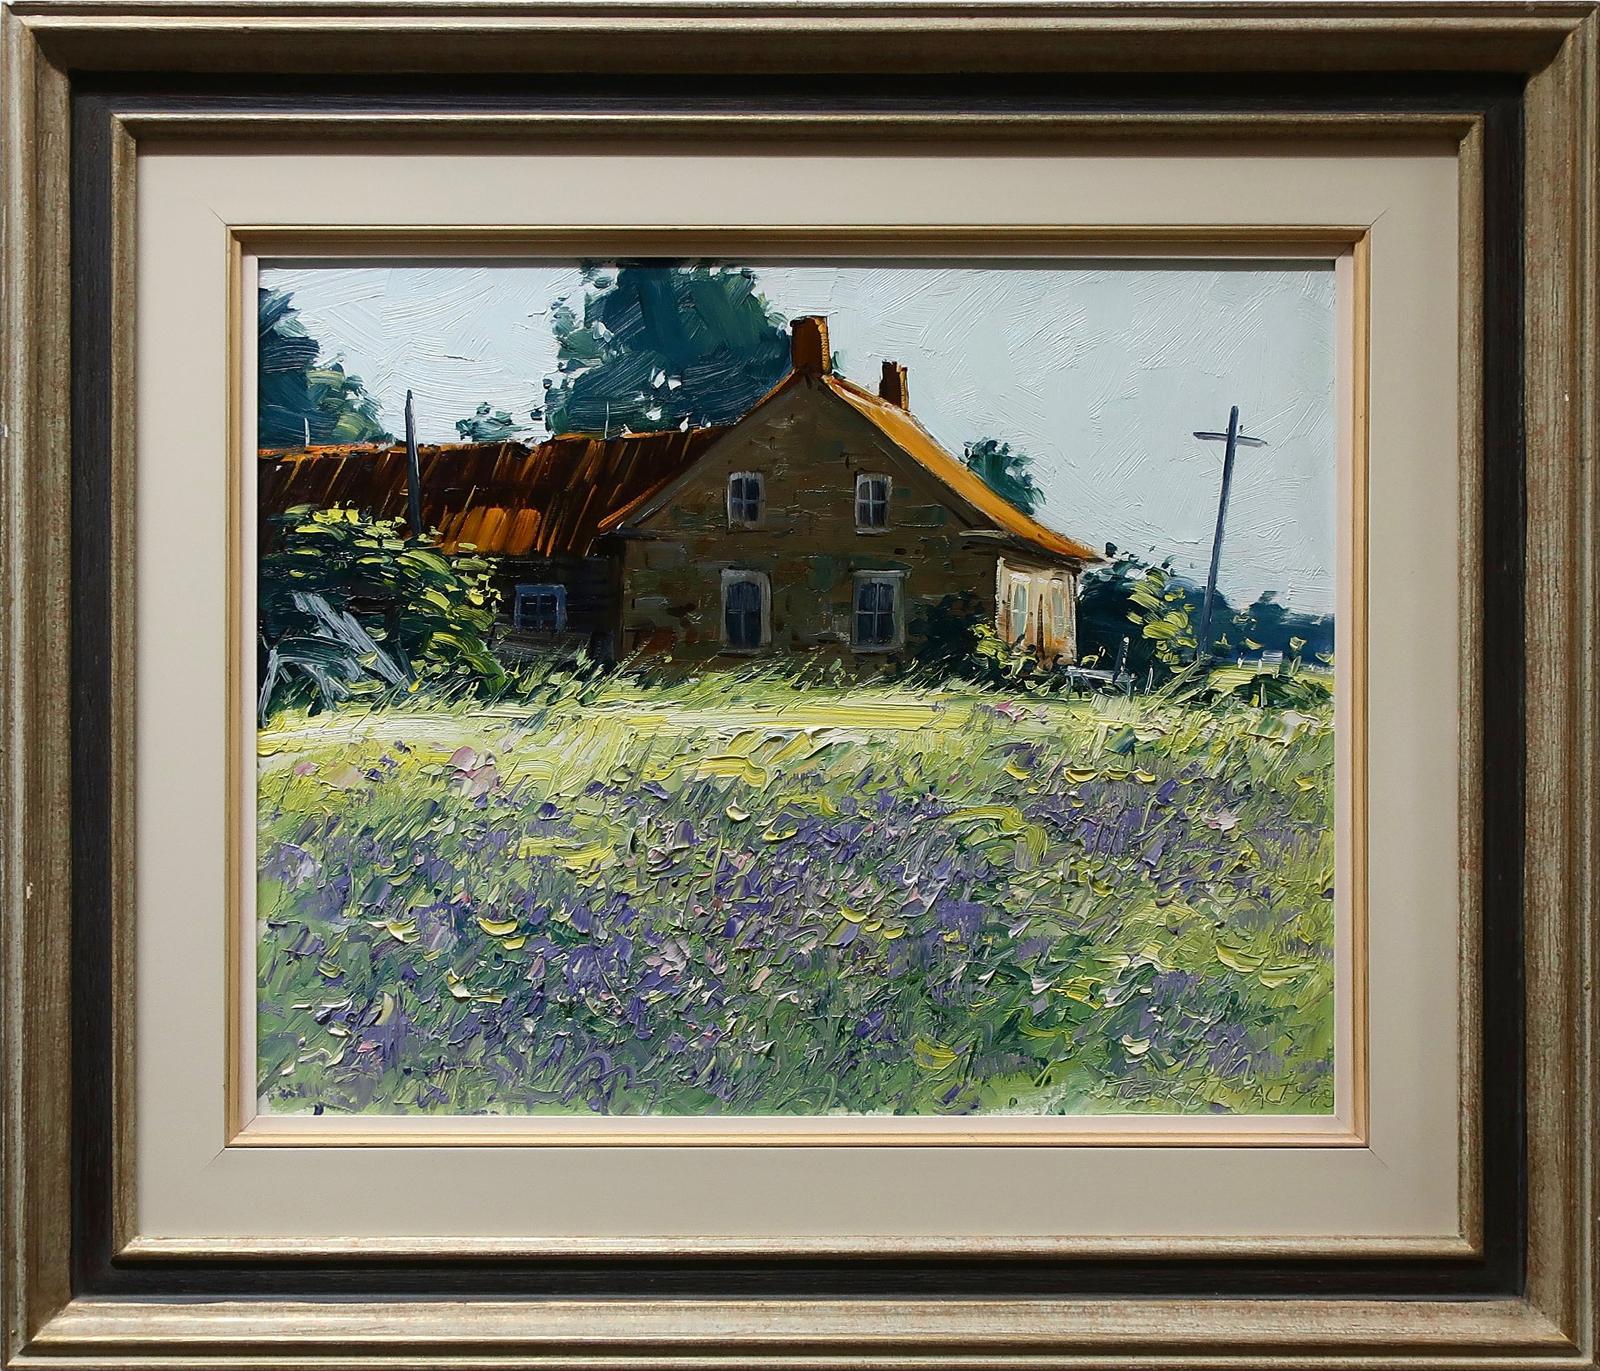 Terry Tomalty (1935) - Untitled (Farmhouse)